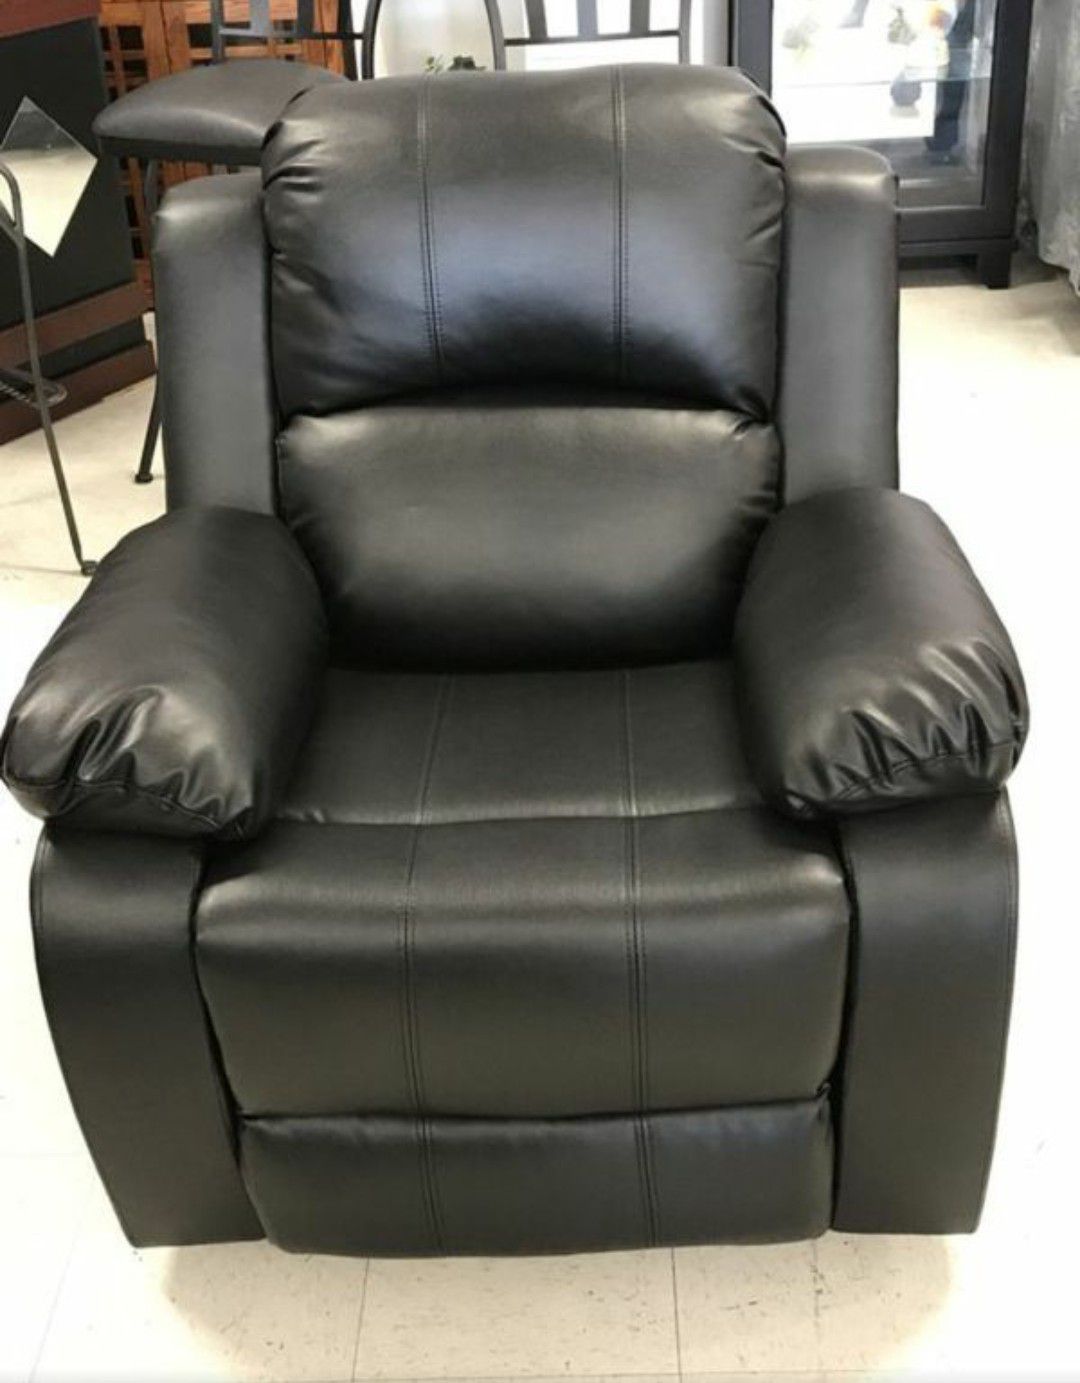 New Reclining Chair Black Bonded Leather